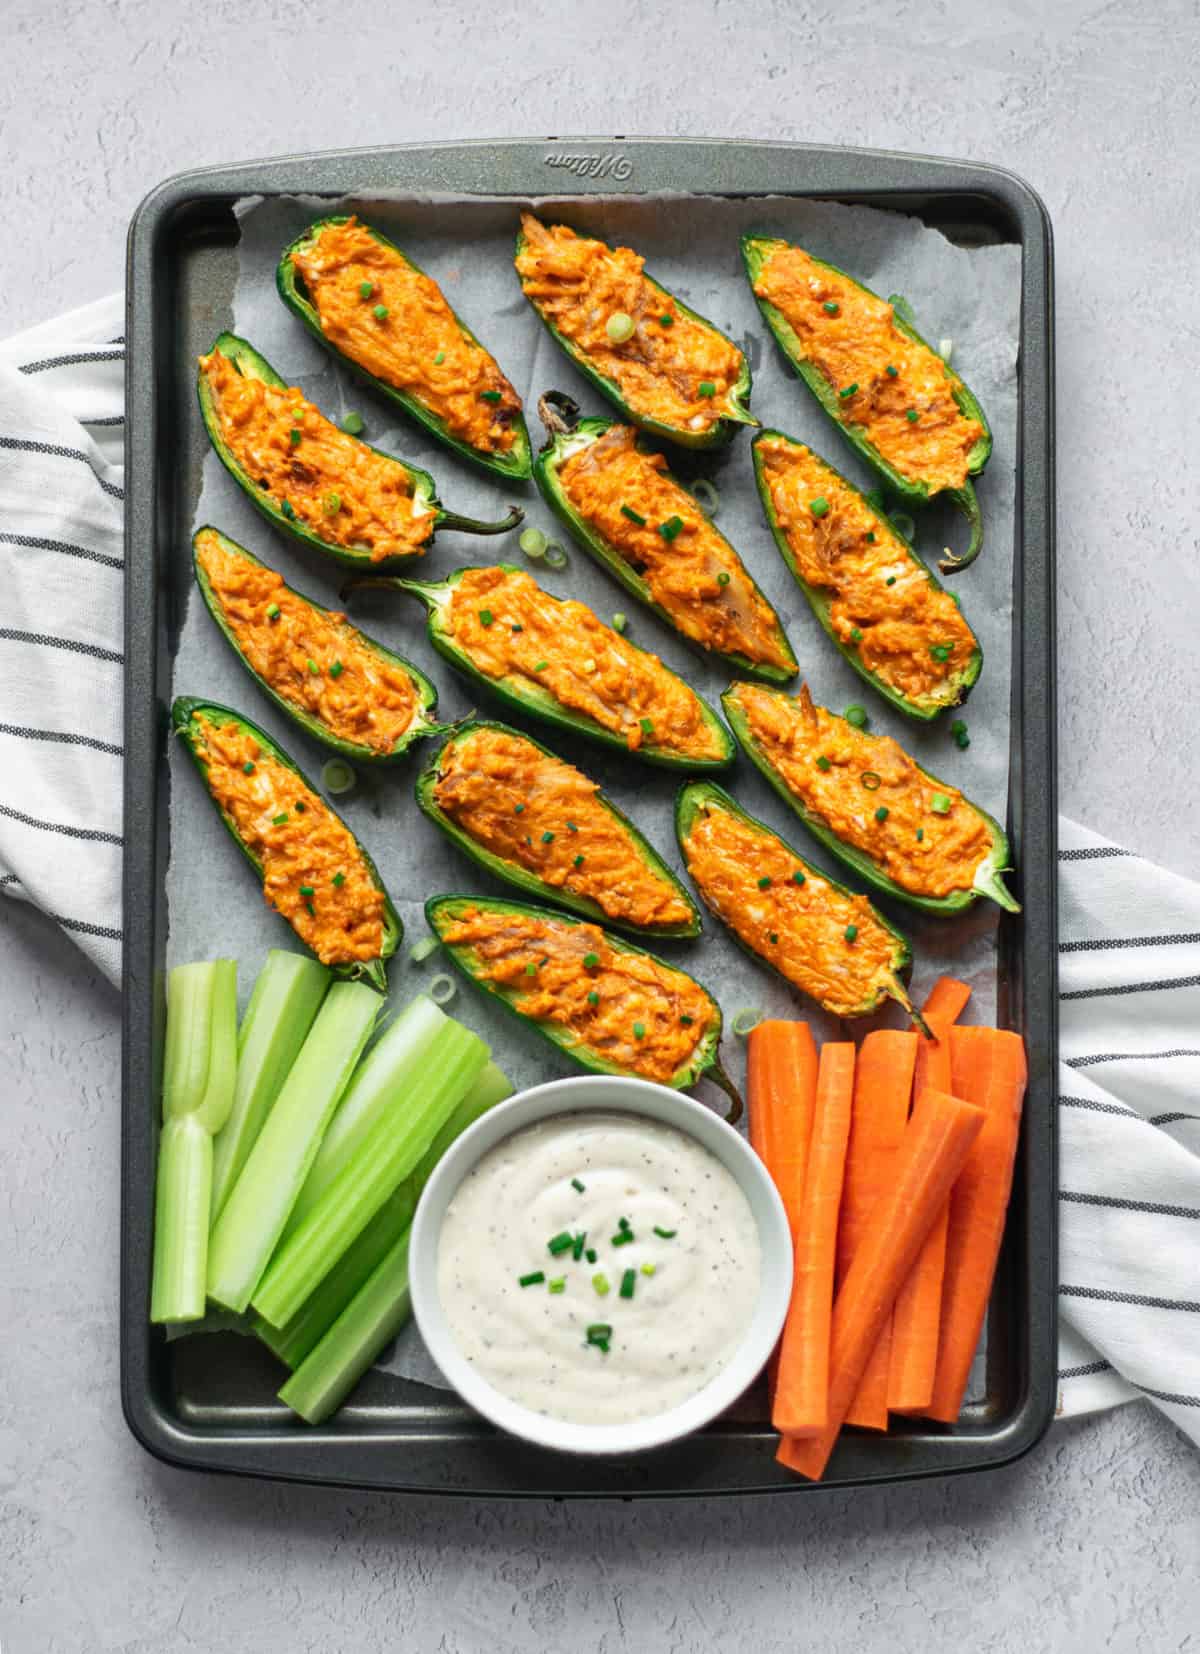 A tray of jalapeno poppers, celery sticks, carrots, and dipping sauce